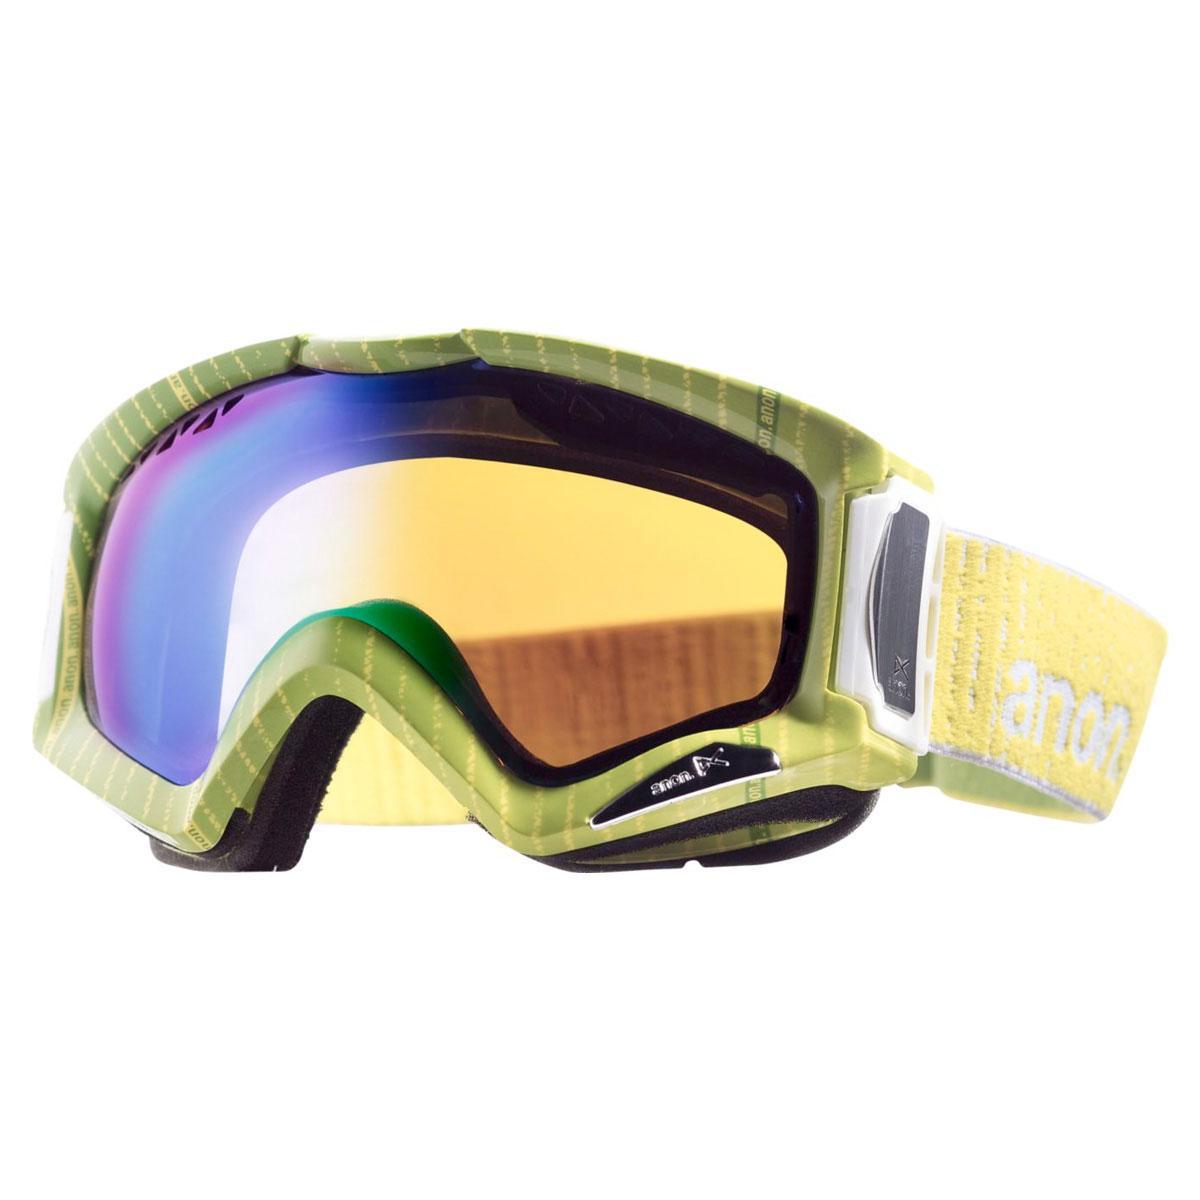 Foto Anon Realm Snowboarding Goggles Pinstryper Green